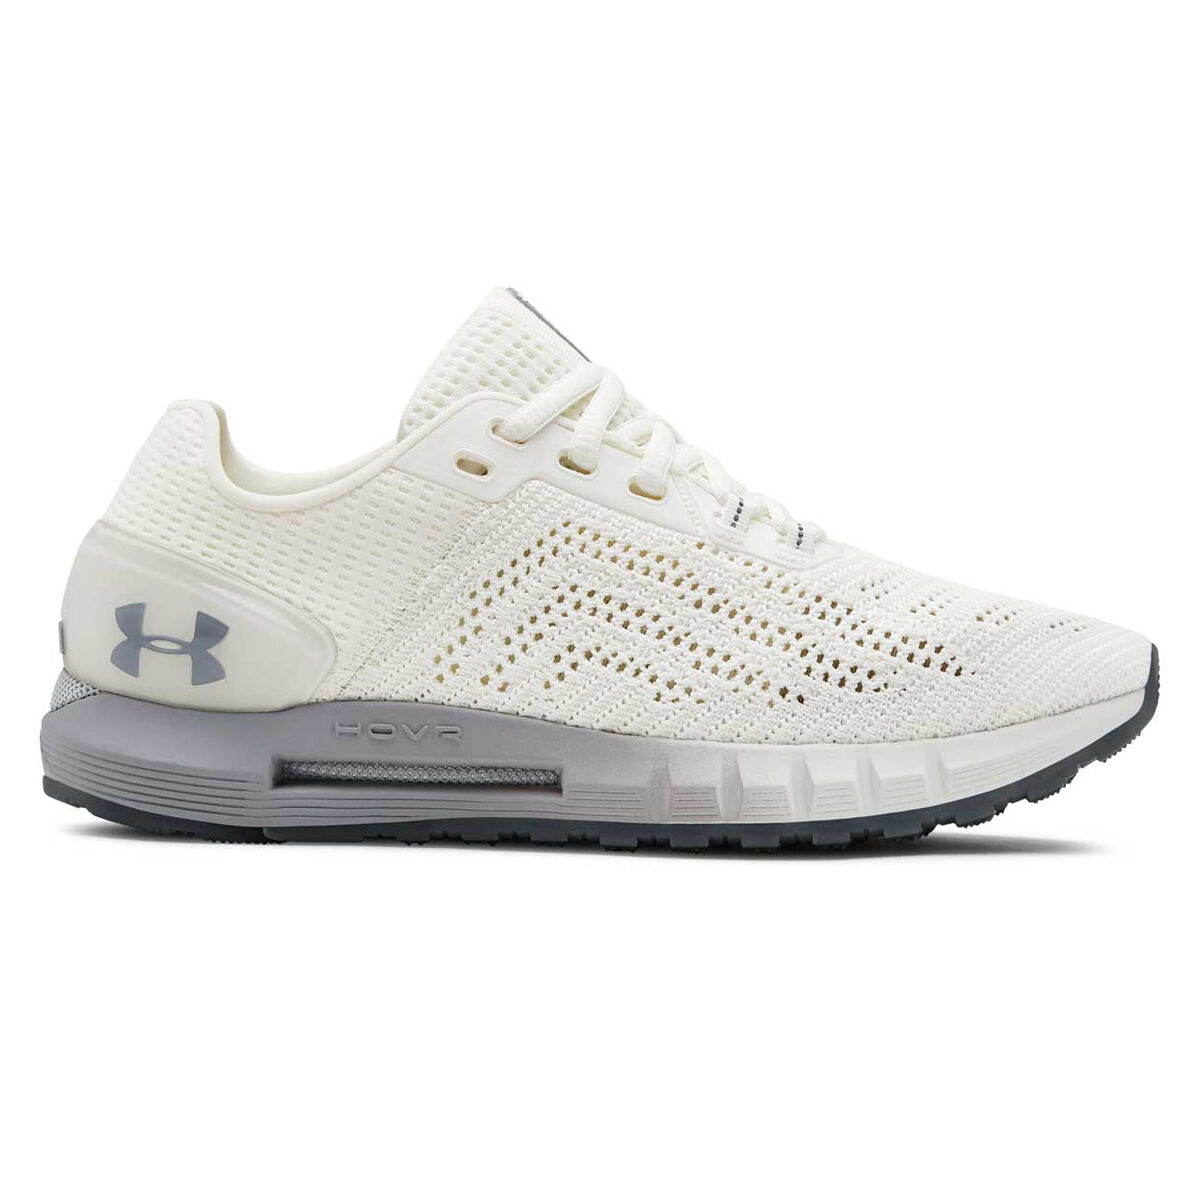 white and grey under armour shoes